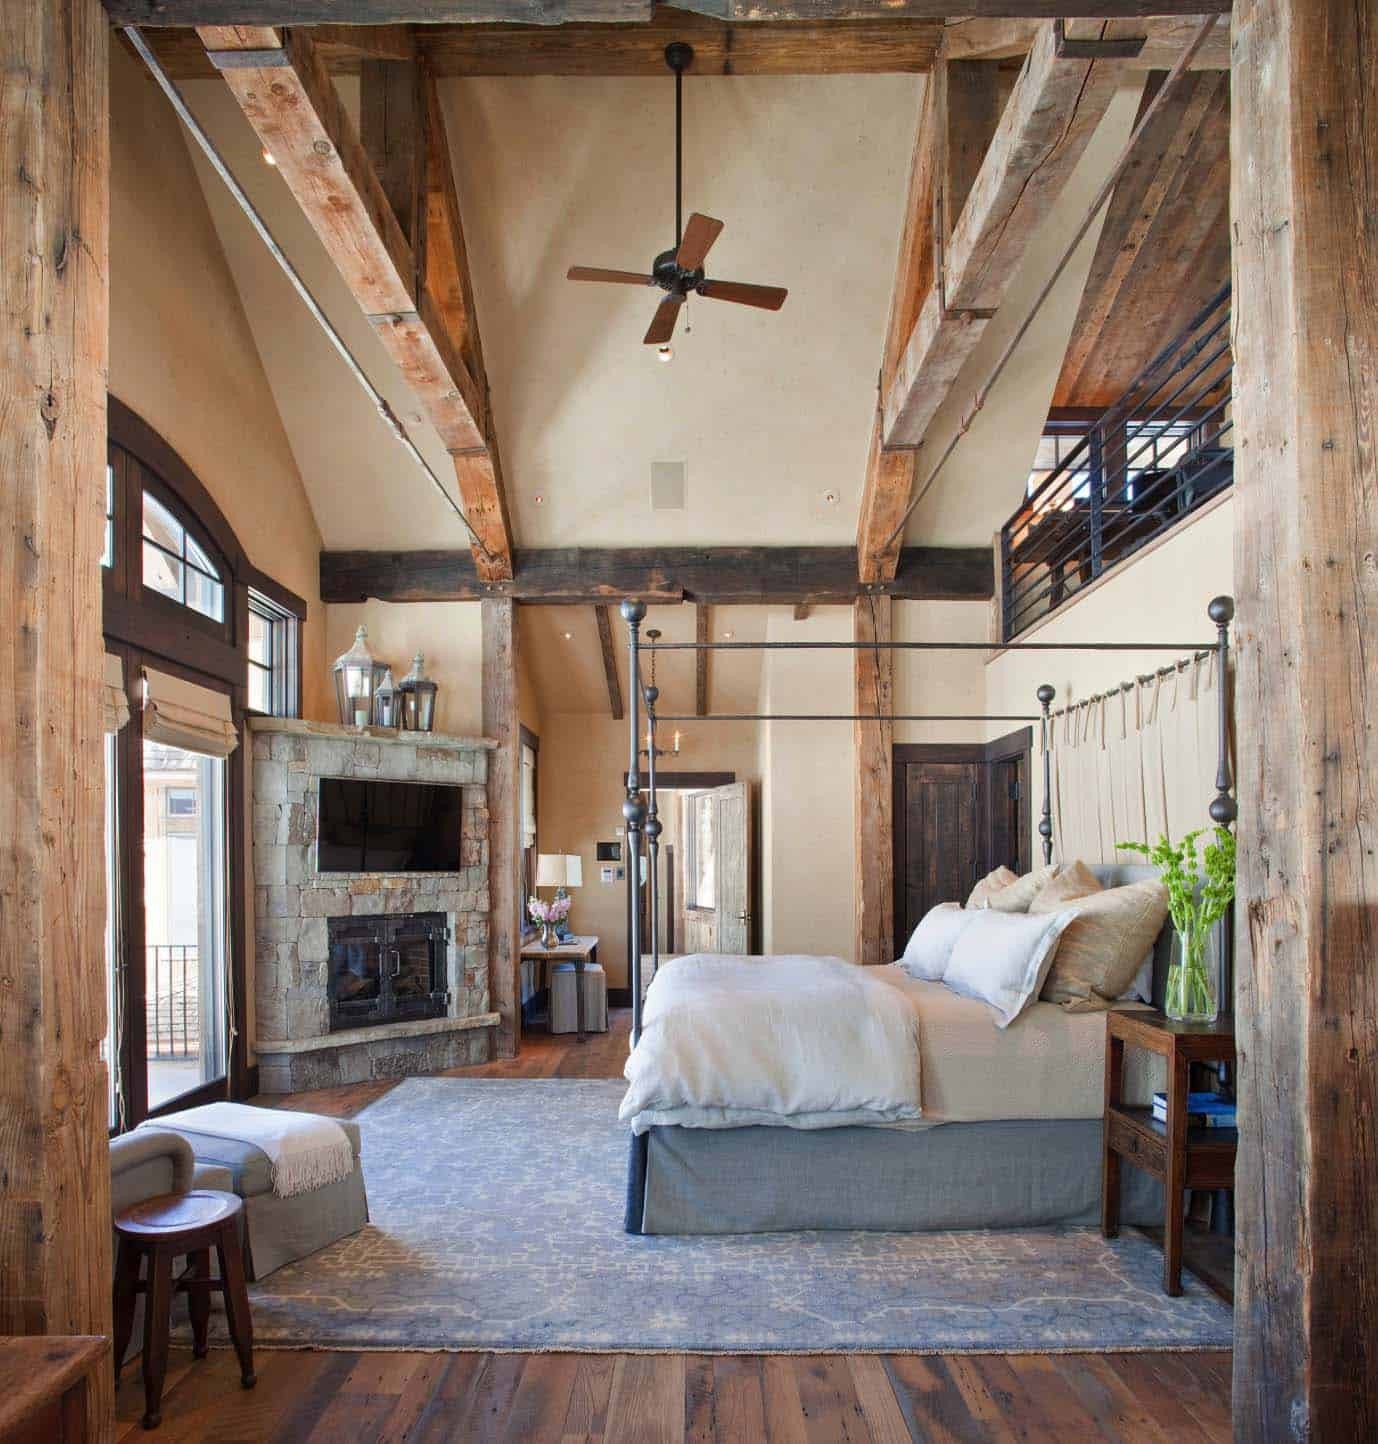 Rustic Master Bedroom Ideas
 40 Amazing rustic bedrooms styled to feel like a cozy away